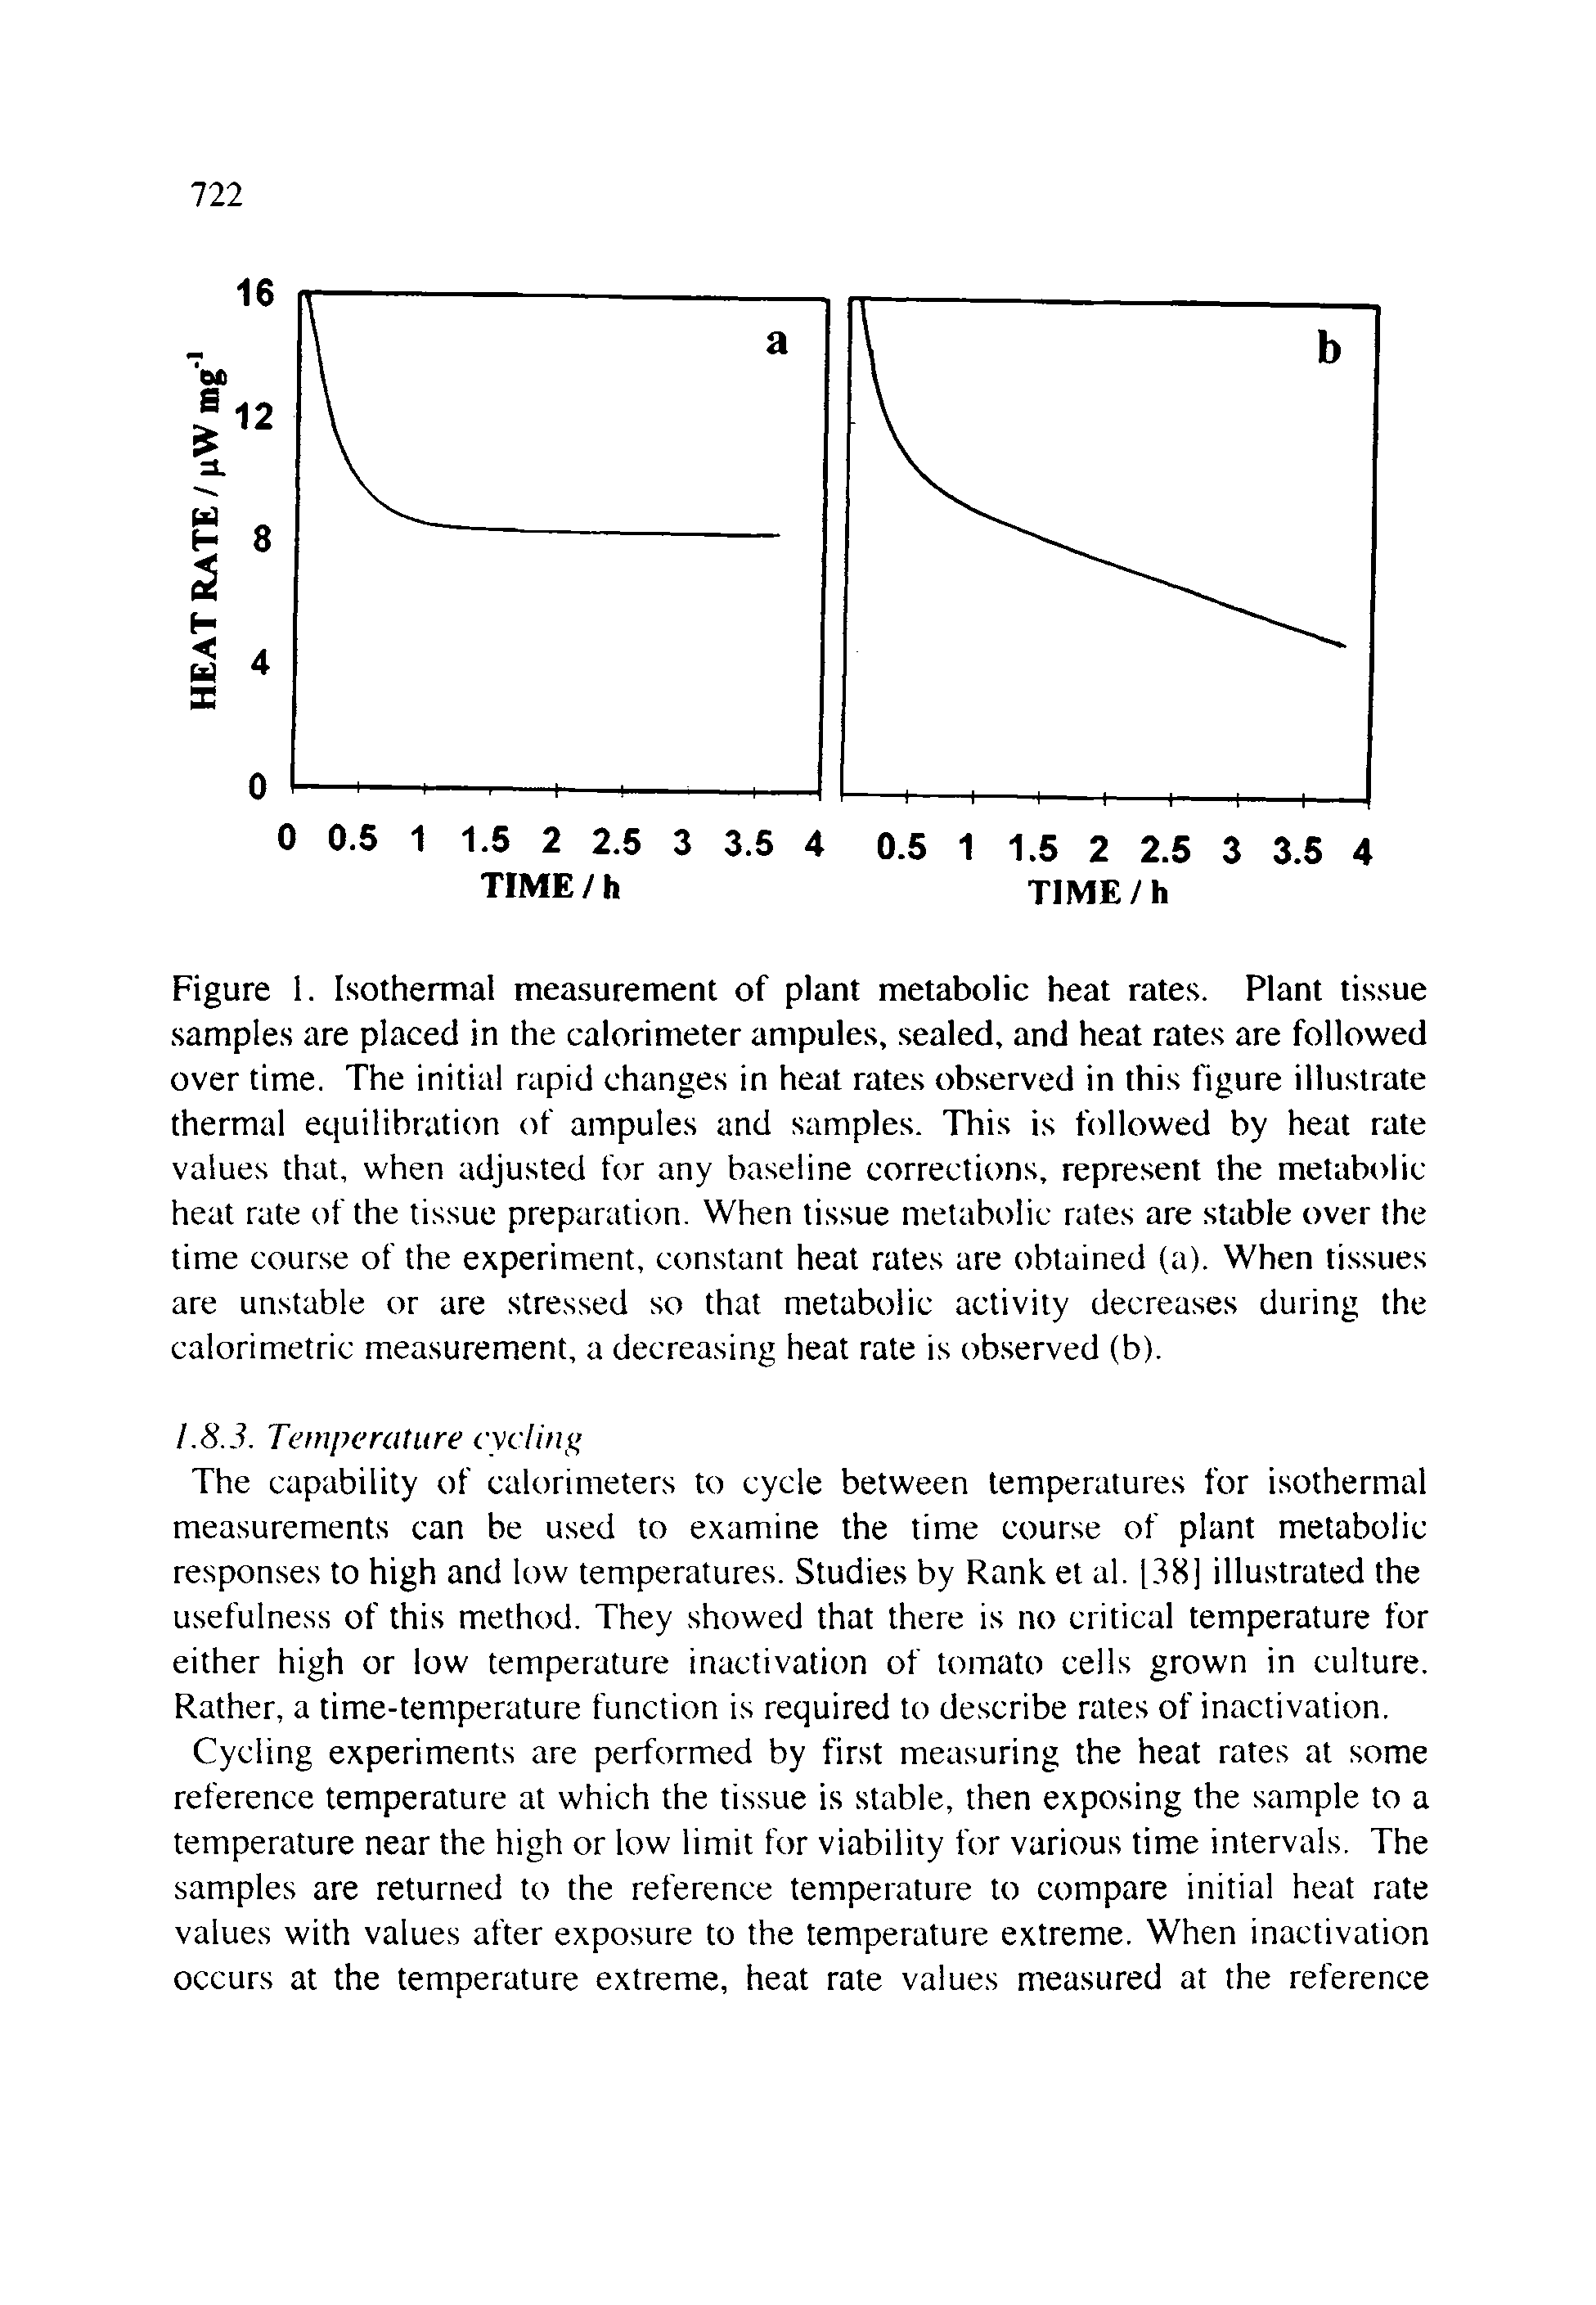 Figure 1. Isothermal measurement of plant metabolic heat rates. Plant tissue samples are placed in the calorimeter ampules, sealed, and heat rates are followed over time. The initial rapid changes in heat rates observed in this figure illustrate thermal equilibration of ampules and samples. This is followed by heat rate values that, when adjusted for any baseline corrections, represent the metabolic heat rate of the tissue preparation. When tissue metabolic rates are stable over the time course of the experiment, constant heat rates are obtained (a). When tissues are unstable or are stressed so that metabolic activity decreases during the calorimetric measurement, a decreasing heat rate is ob.served (b).